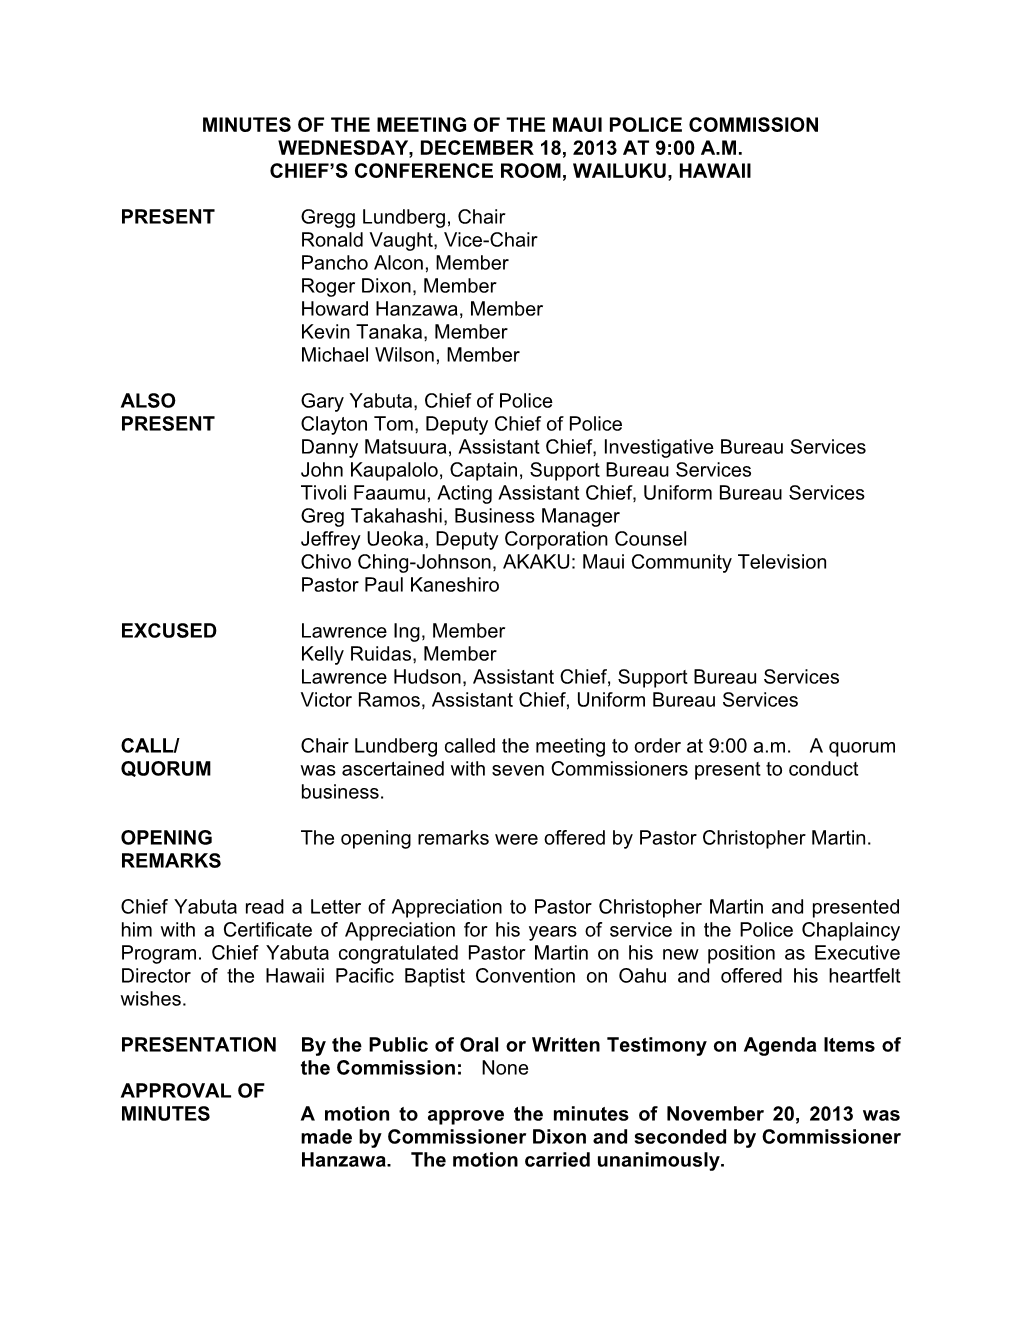 Minutes of the Meeting of the Maui Police Commission Wednesday, December 18, 2013 at 9:00 A.M